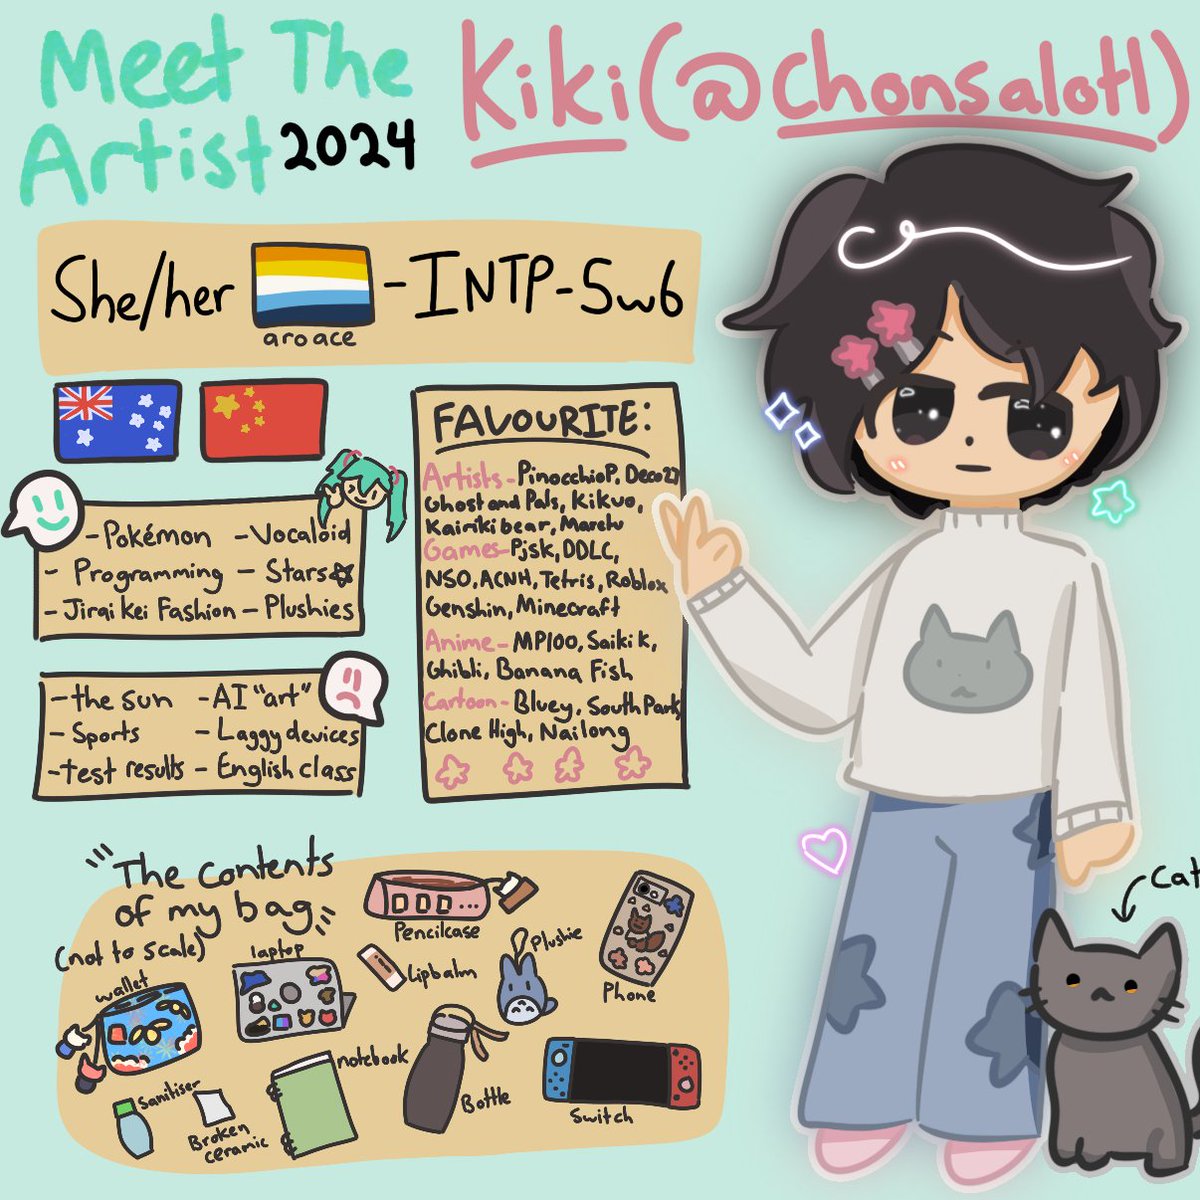 Uh hi this is me! I’m also looking for #artmoots